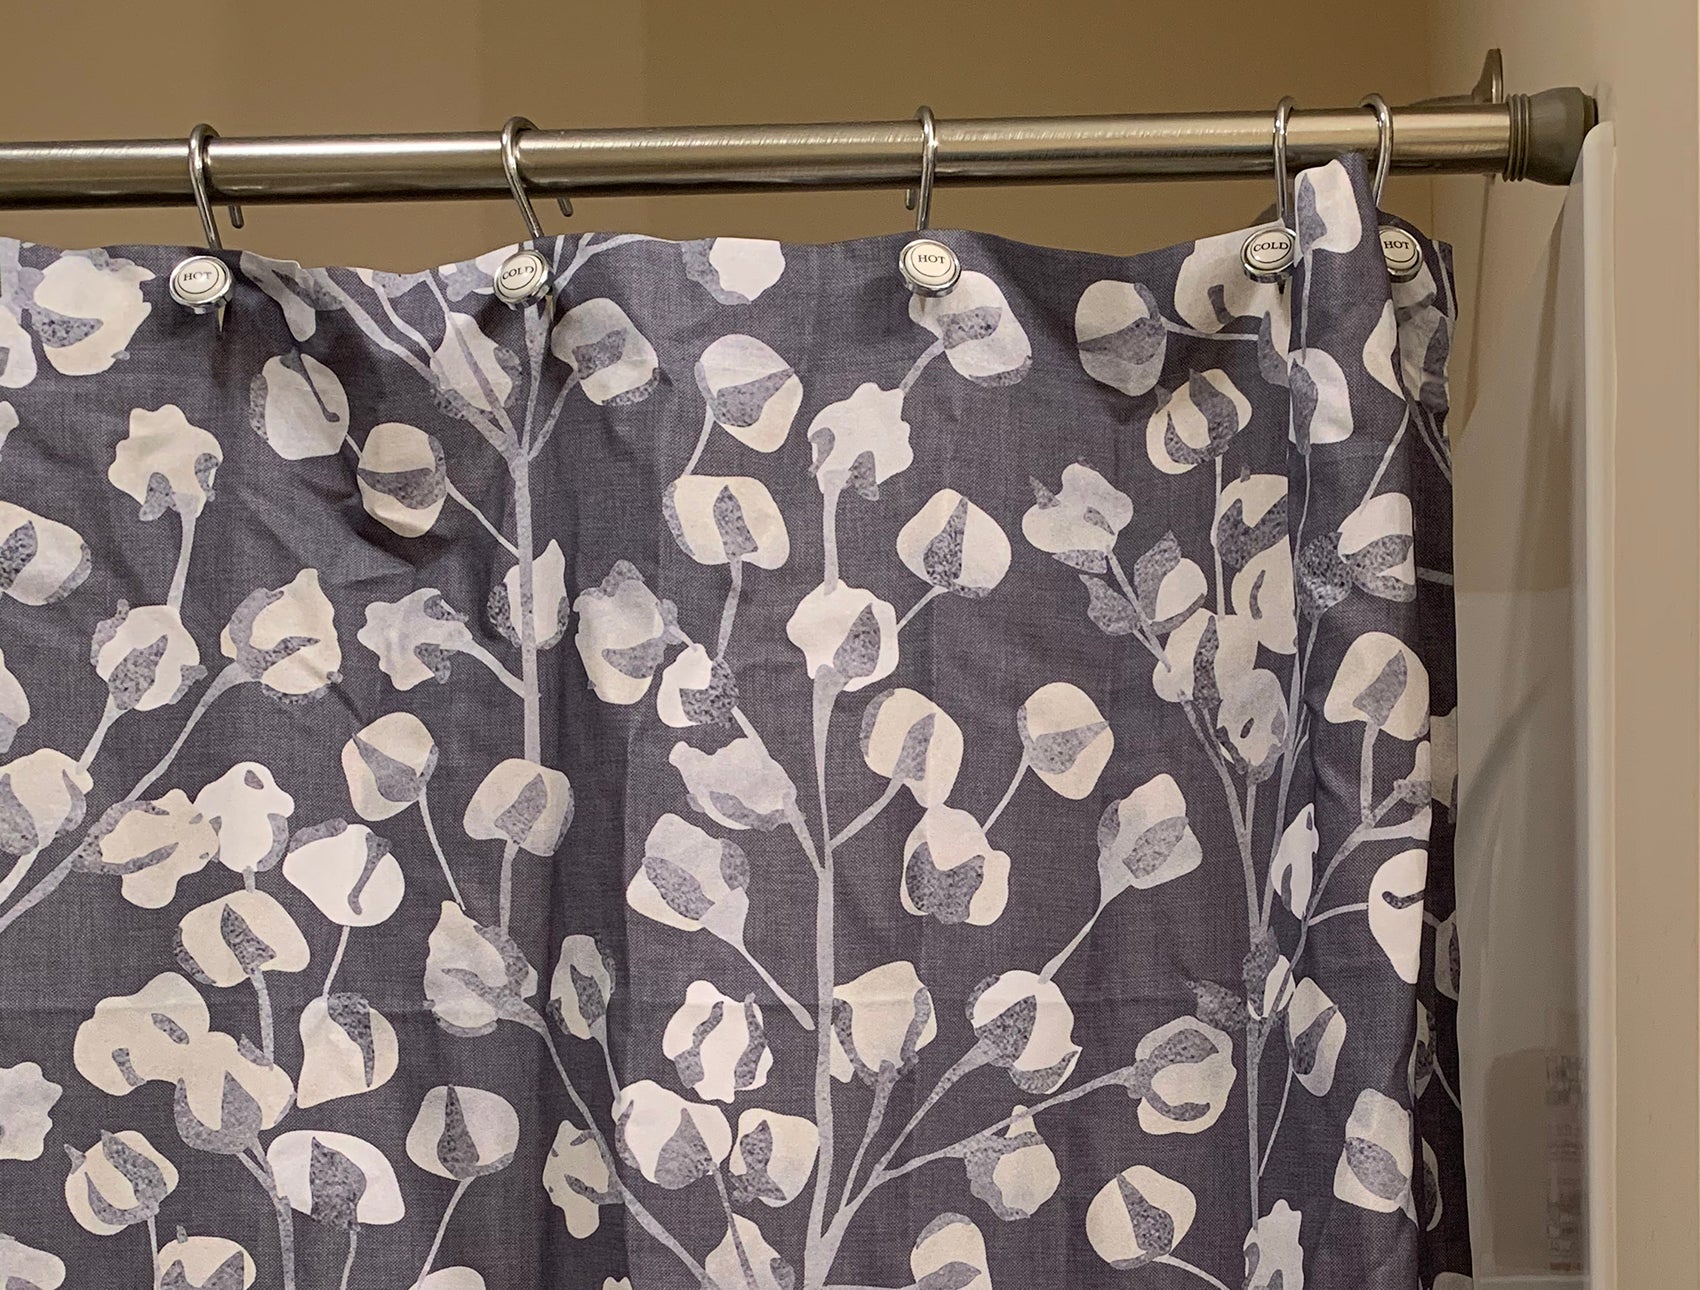 Shower Curtain Tips and Tricks